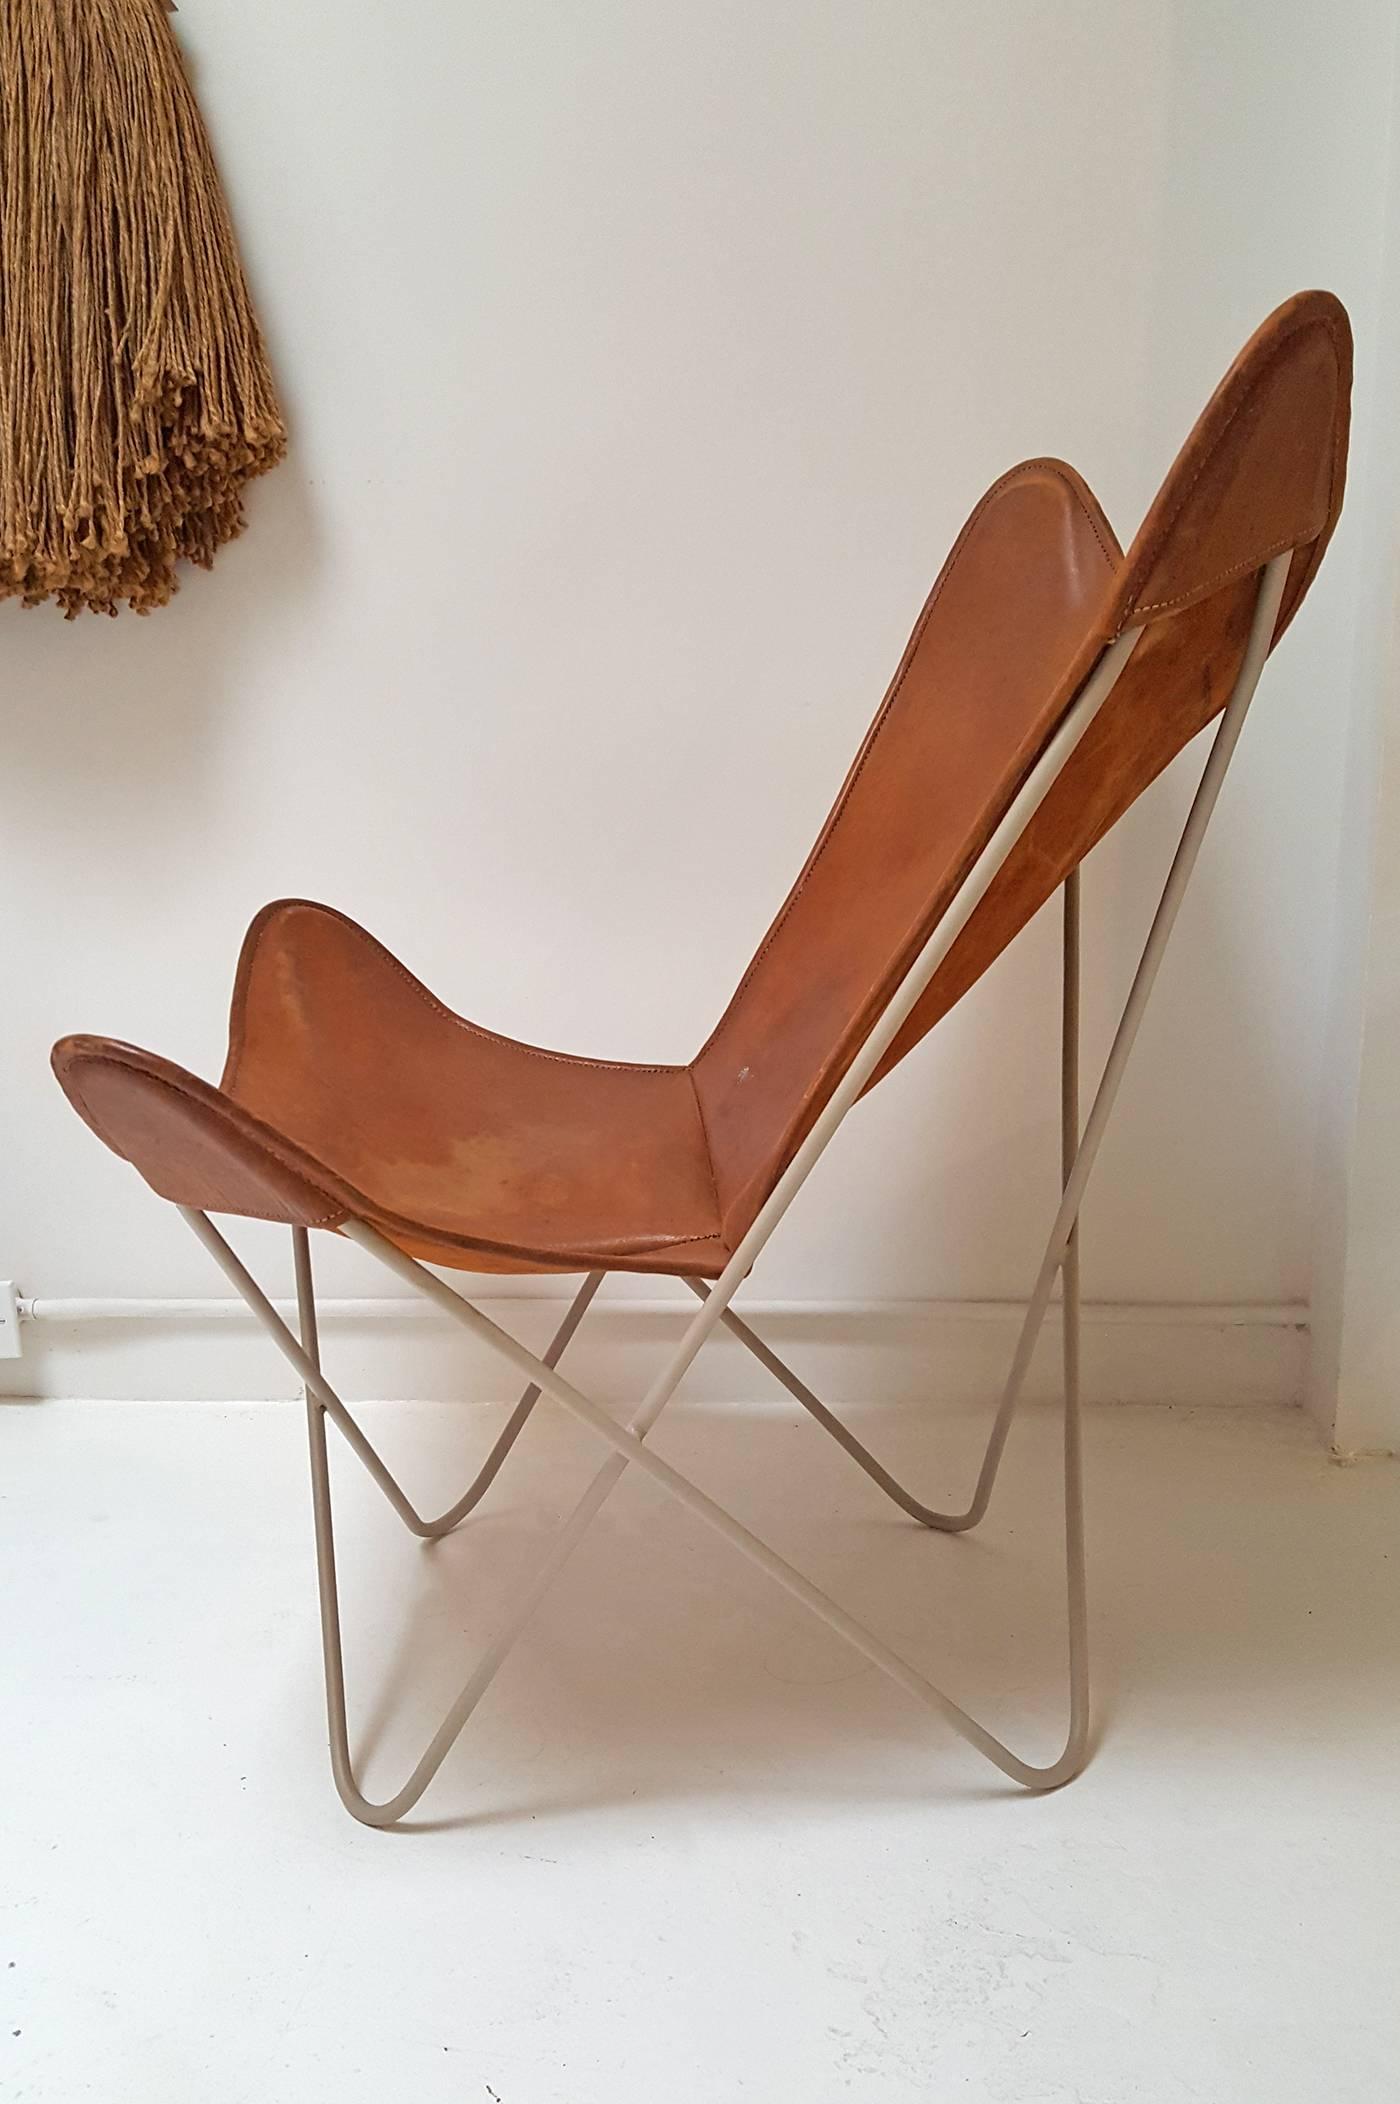 American Knoll Hardoy Butterfly Sling Chairs 1954 brown leather